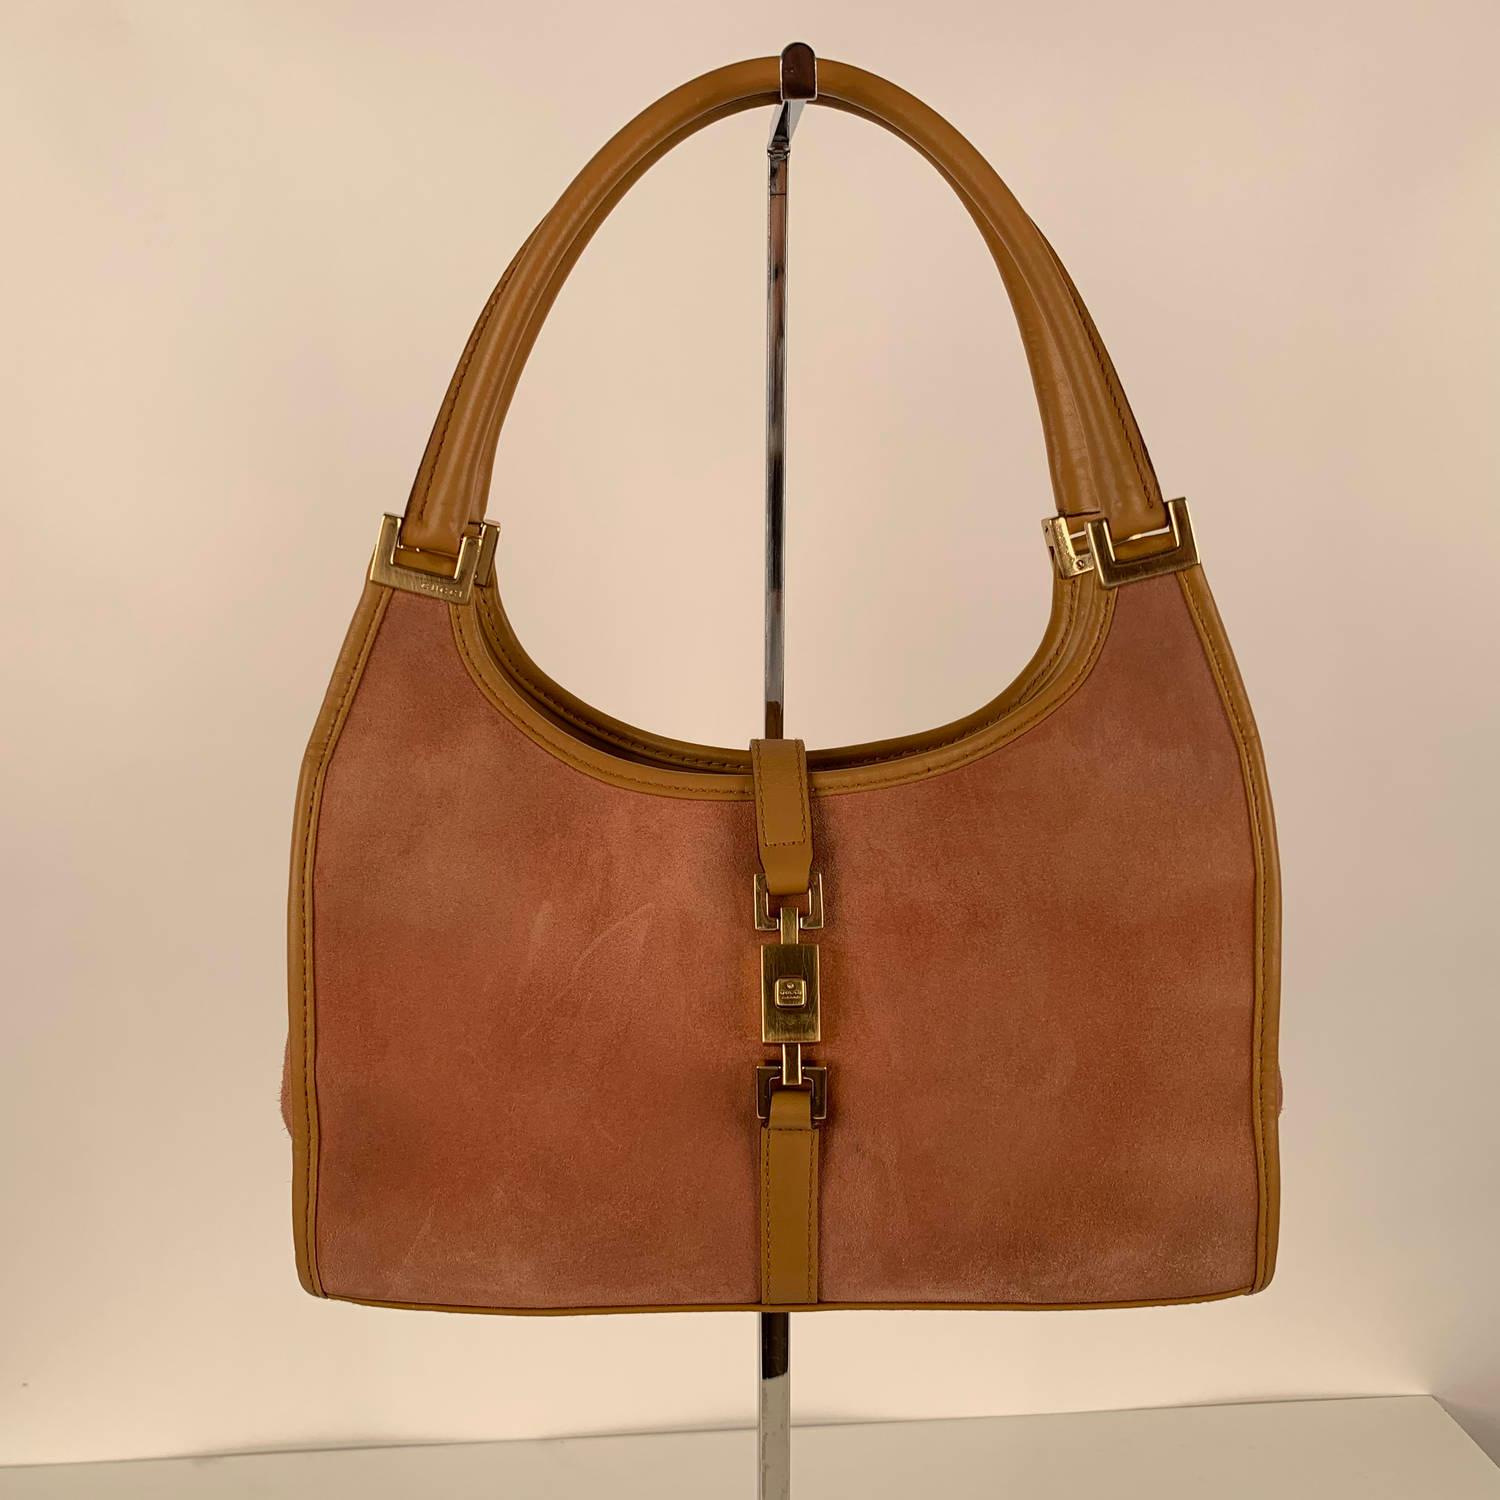 GUCCI stirrup hobo crafted in pink suede with tan leather trim. Gold metal hardware. Fold over strap with push closure on the front. Beige monogram fabric lining. 1 side zip pocket inside. 'GUCCI - Made in Italy' tag inside (with serial number on